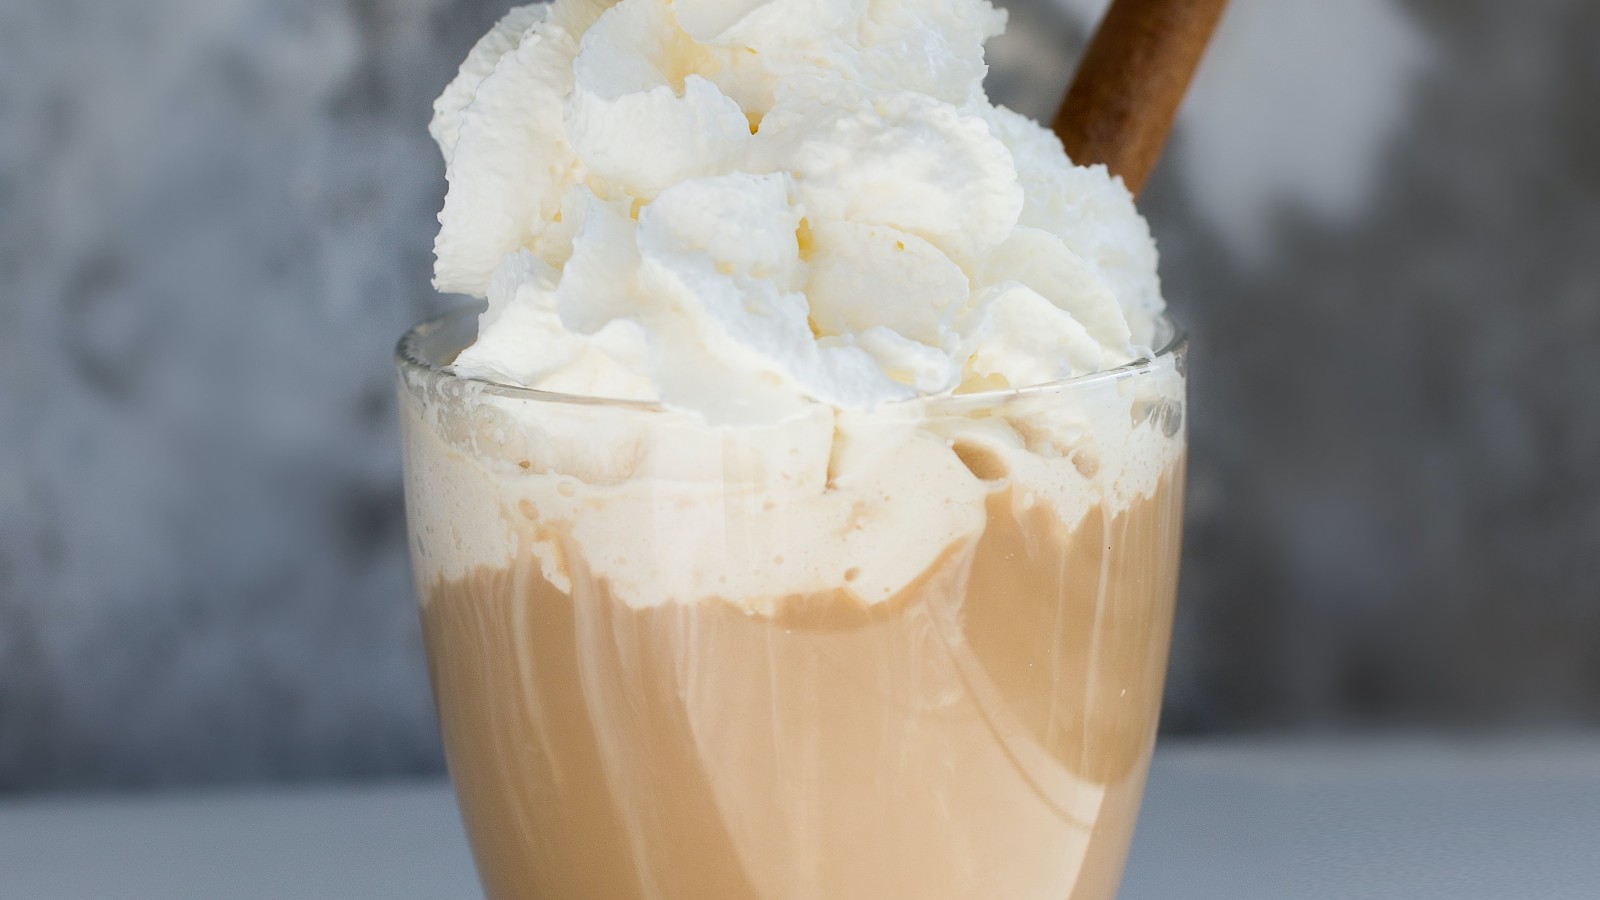 Image of Peanut Butter Chocolate Iced Coffee